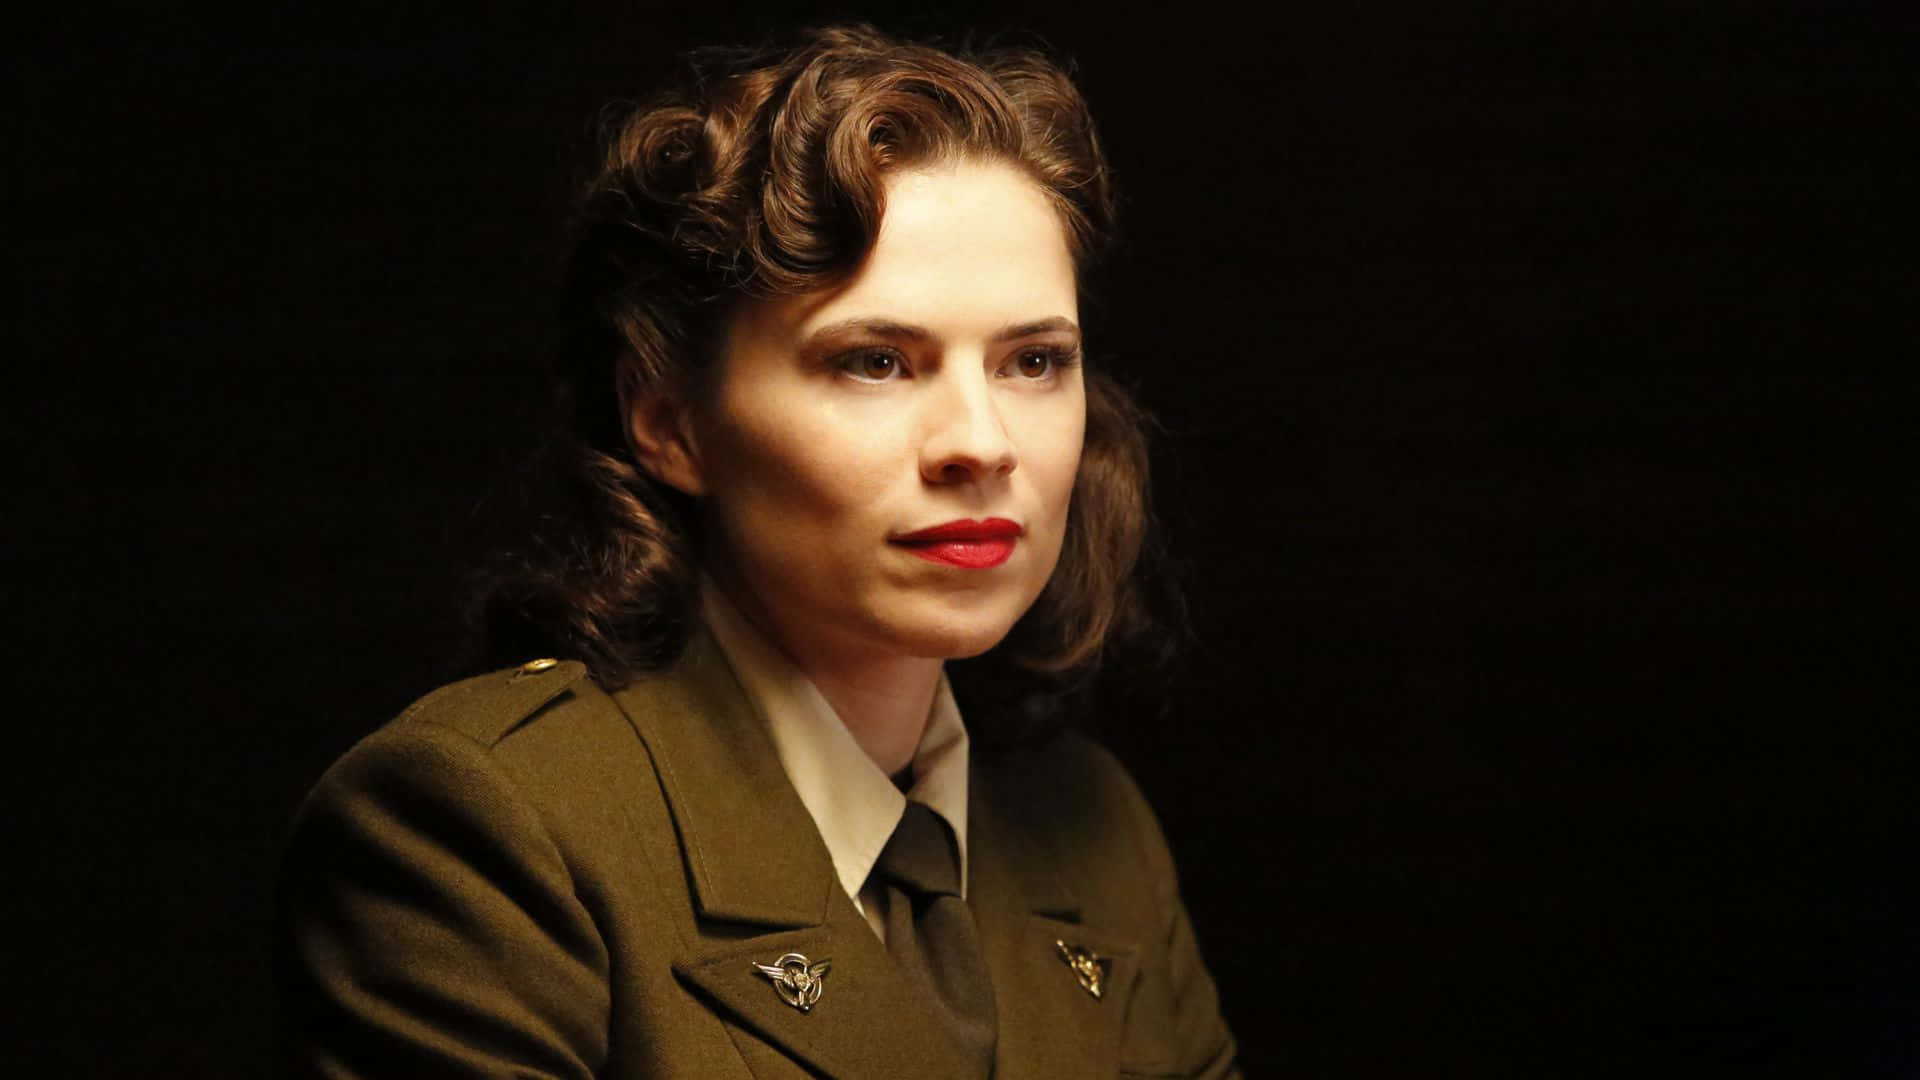 Agent Peggy Carter - Saving the World with Courage and Guts" Wallpaper